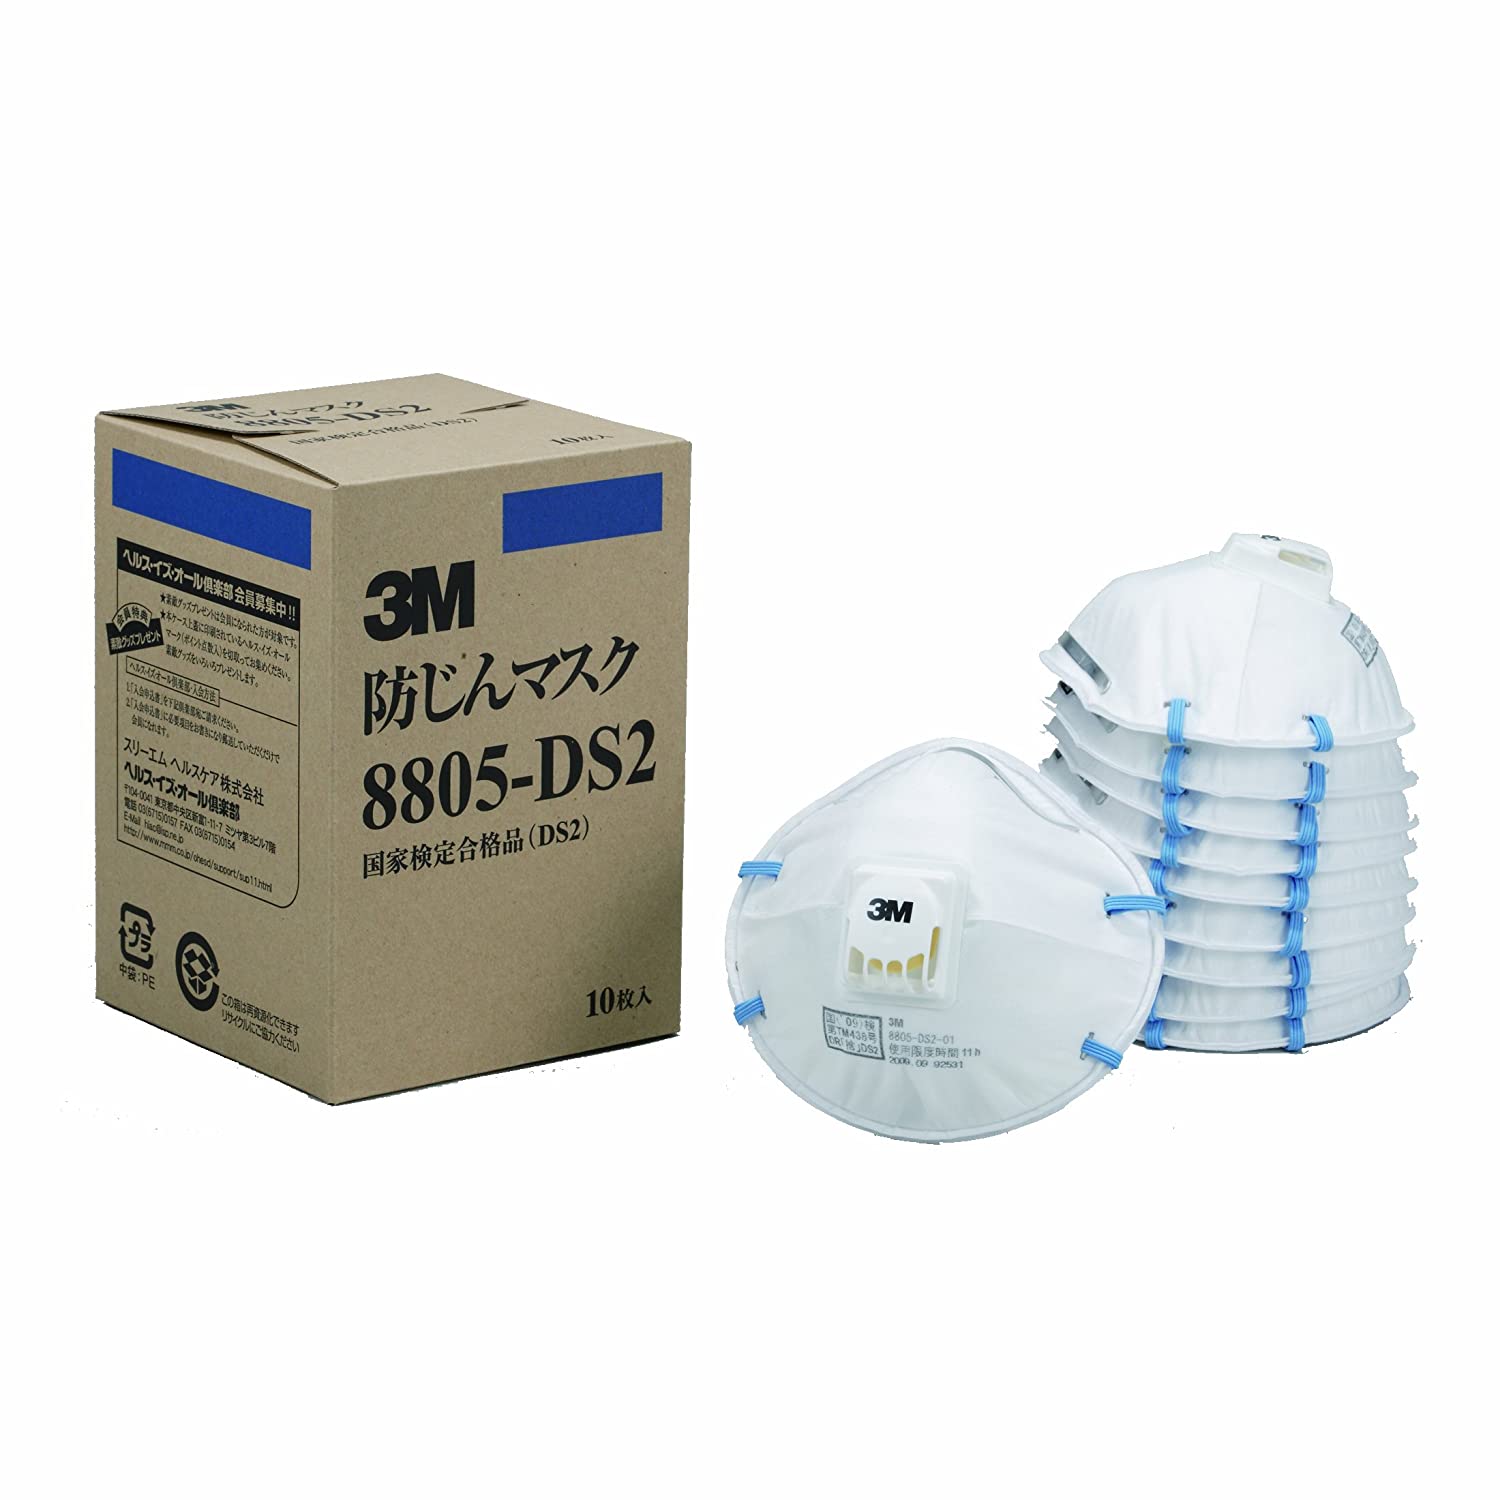 (Equal to N95) 3M Mask 8805-DS2 10 piece